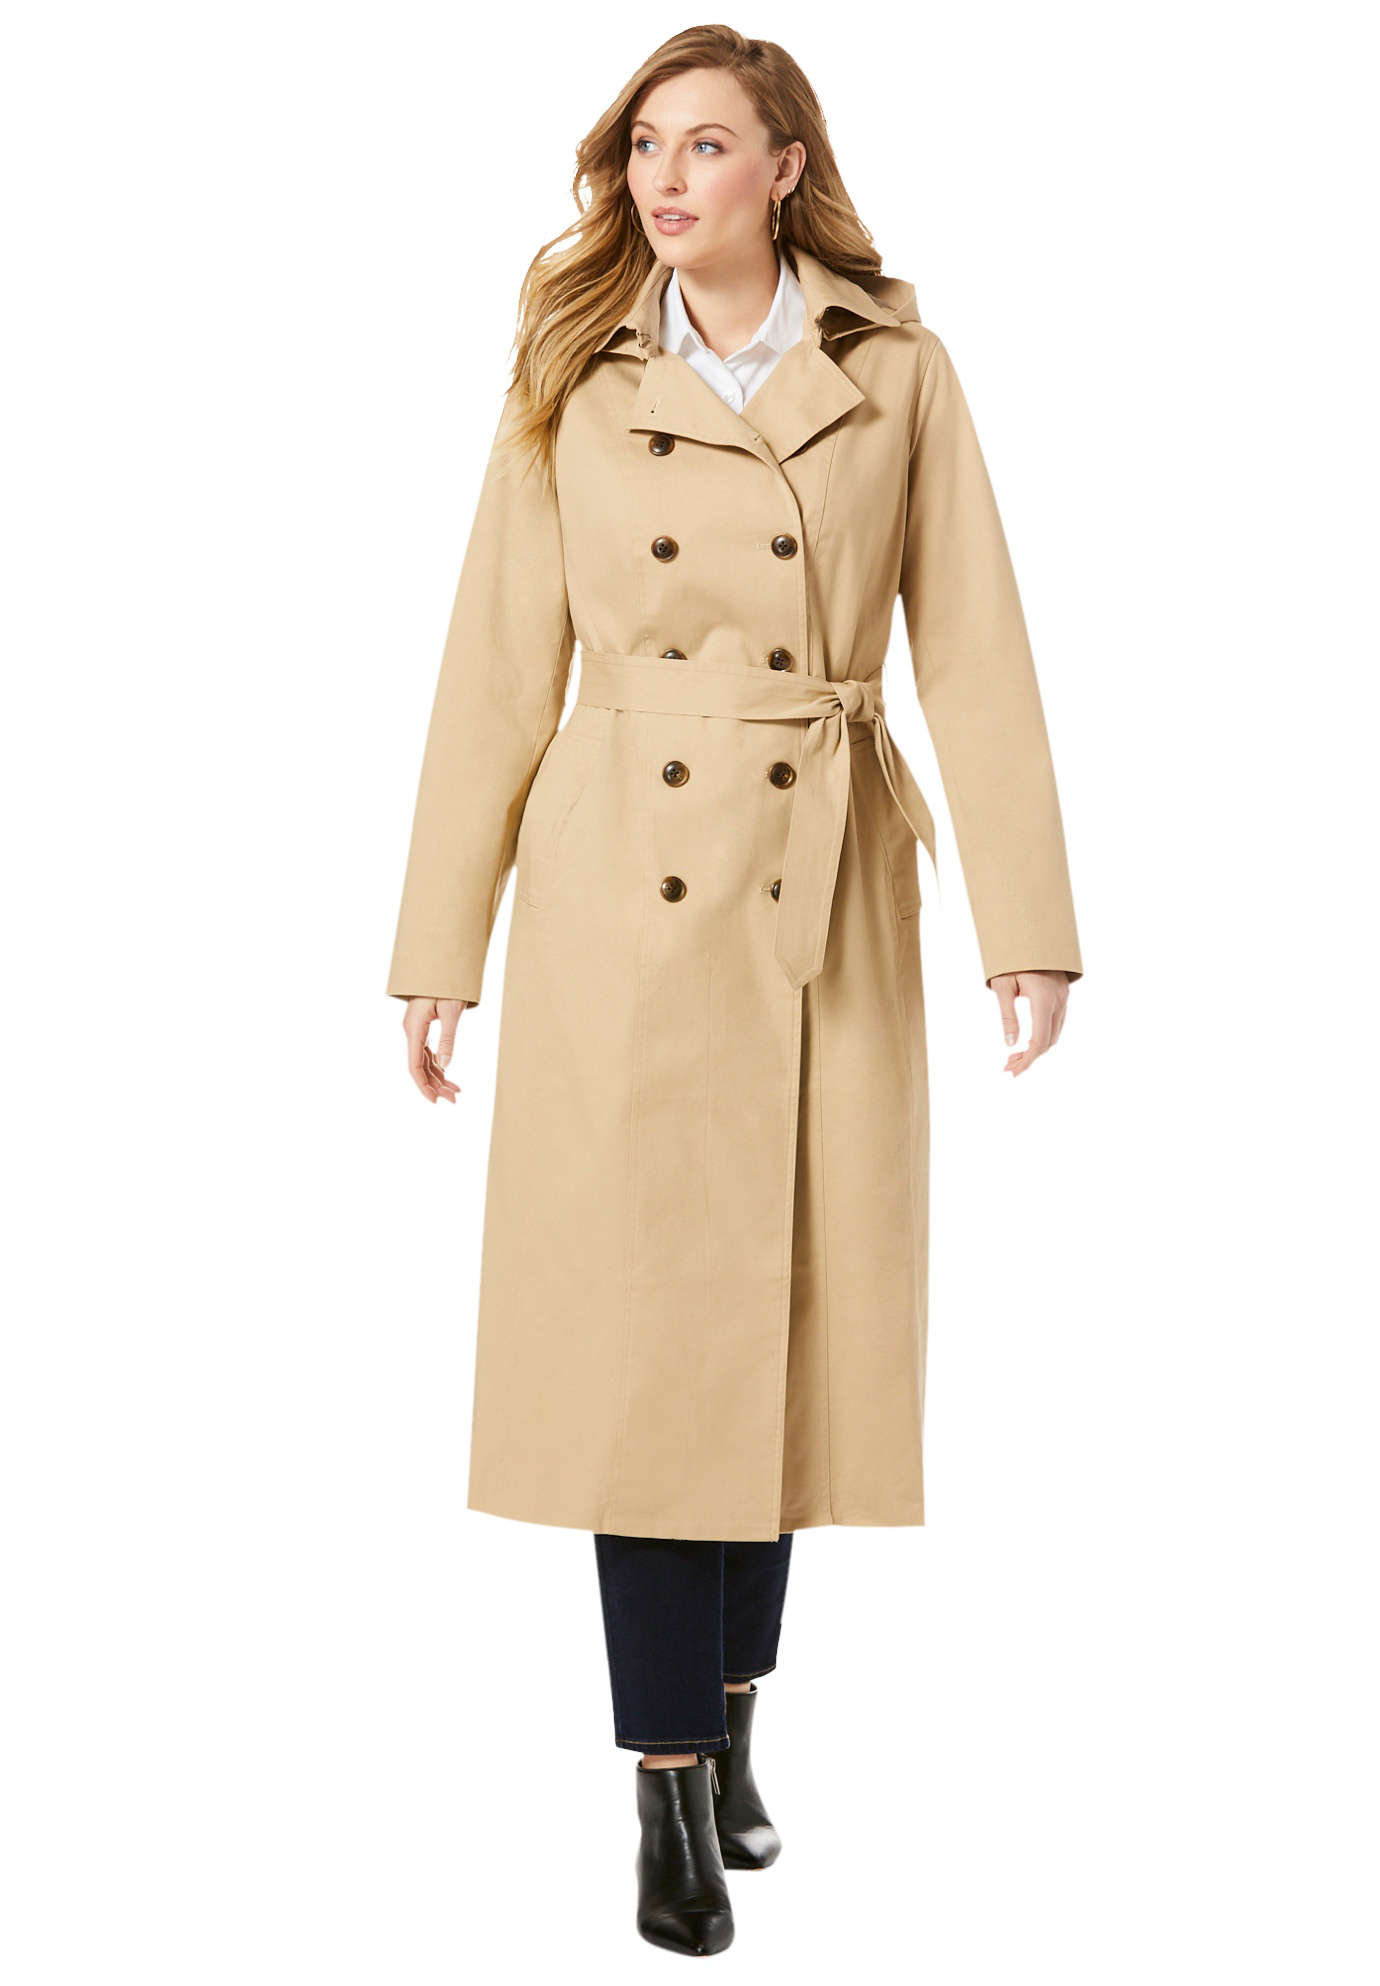 Jessica London Women's Plus Size Double Breasted Long Trench Coat Raincoat - image 1 of 6